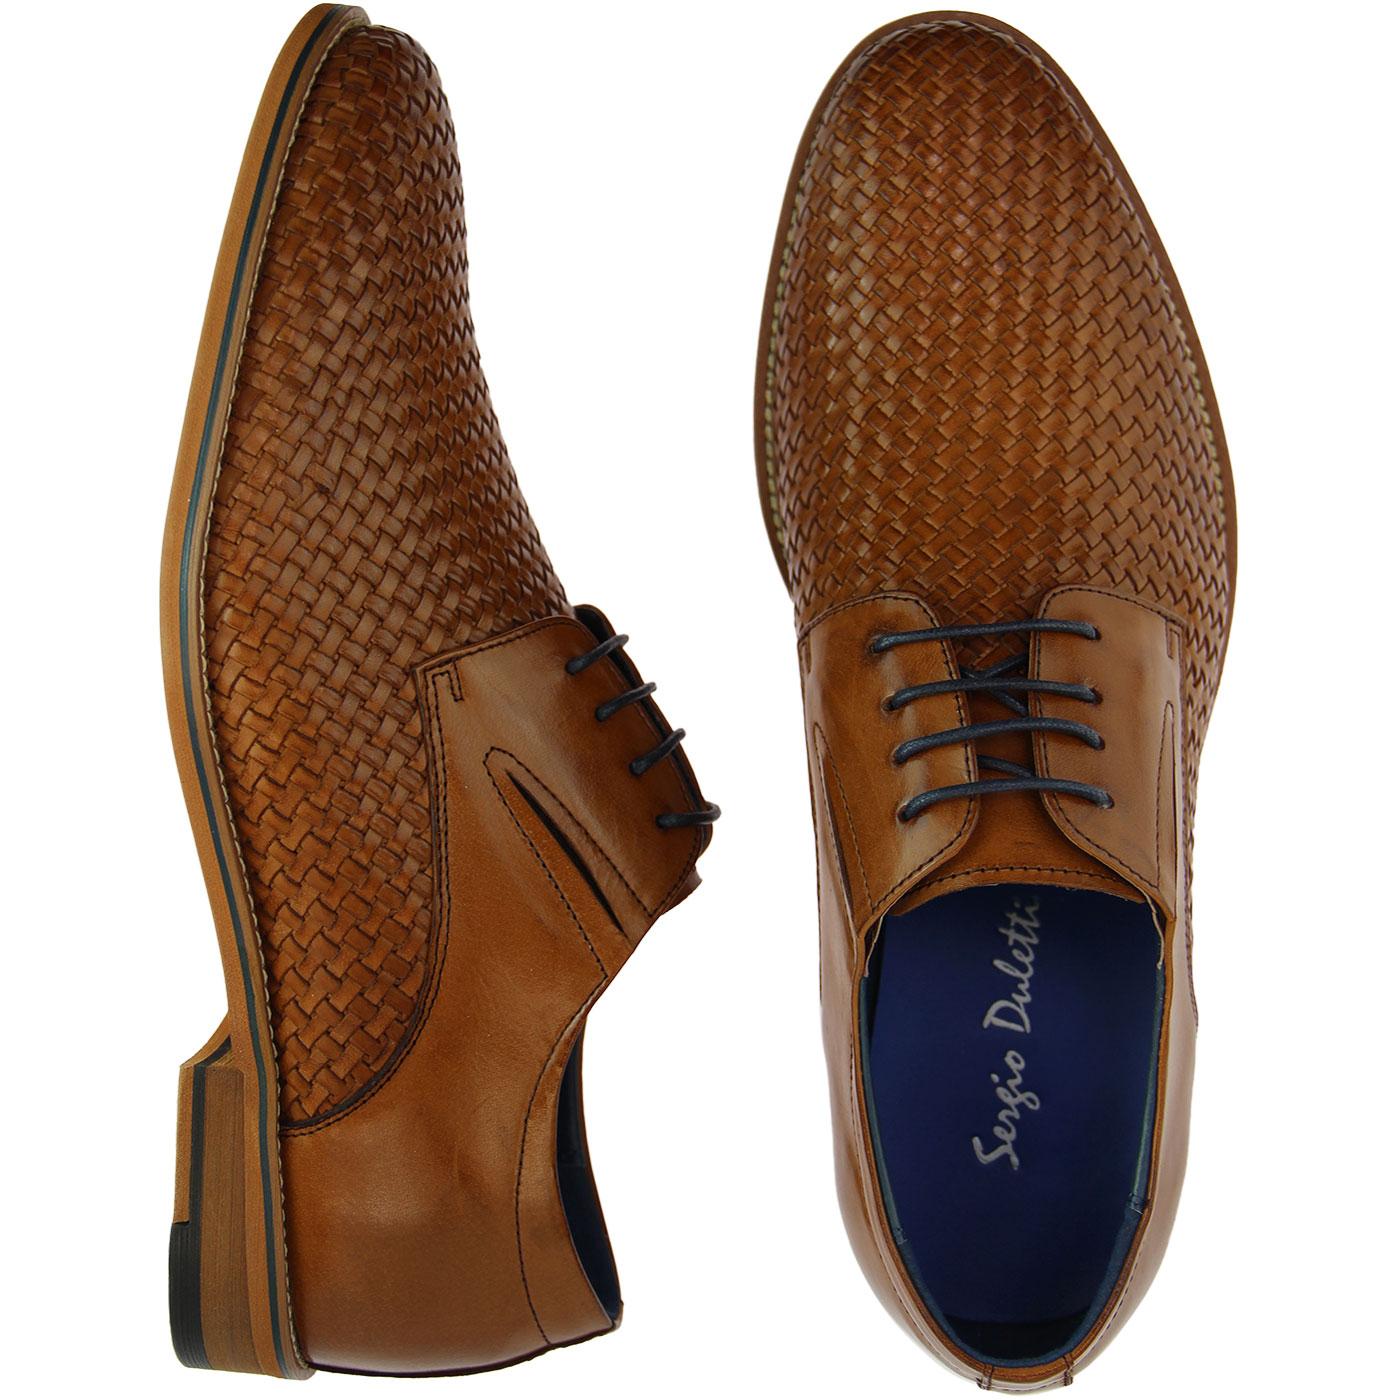 SERGIO DULETTI Toni Basket Weave Derby Shoes in Brown